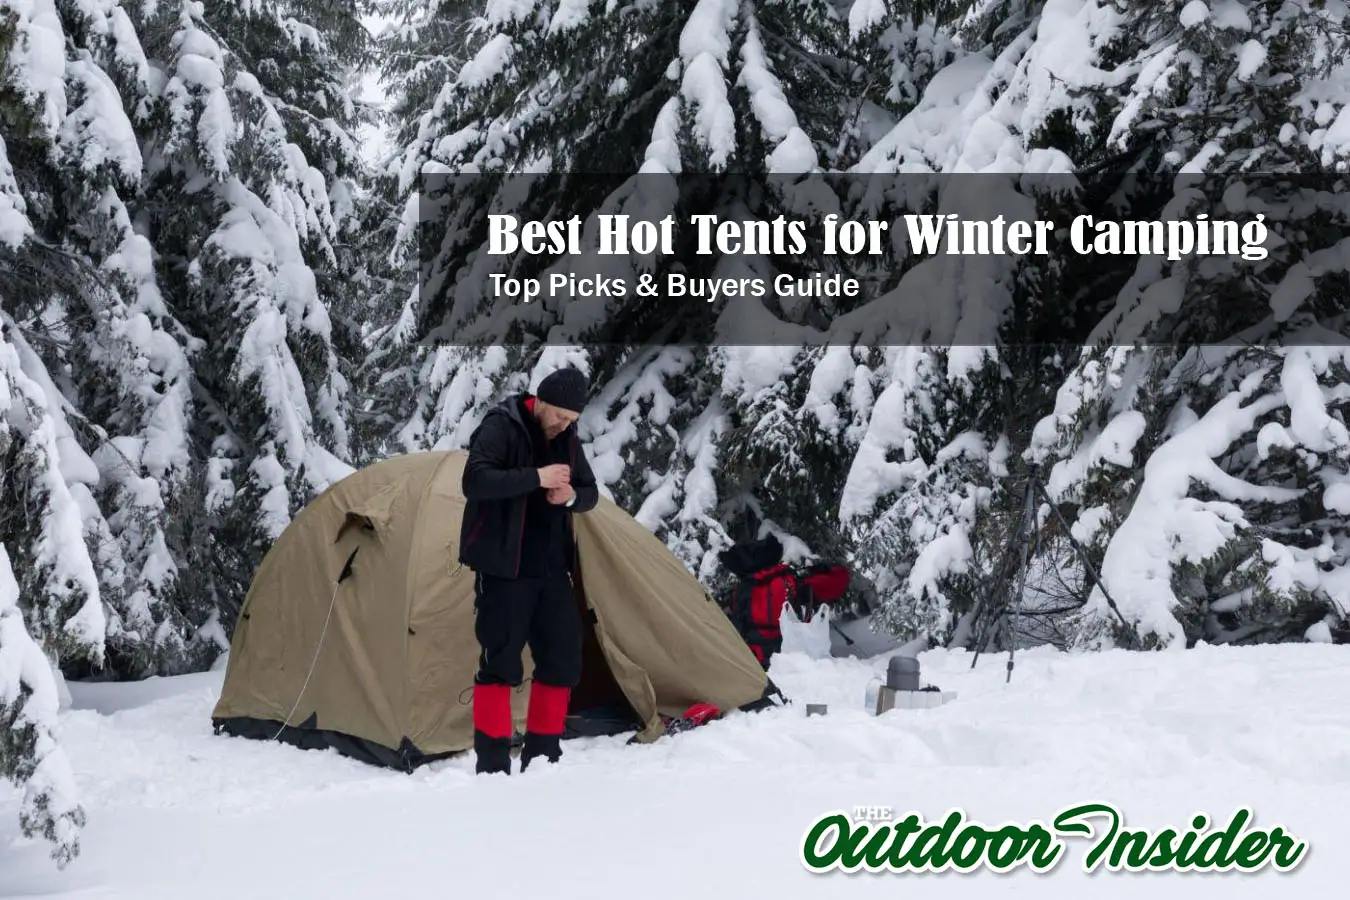 Best Hot Tent for Winter Camping